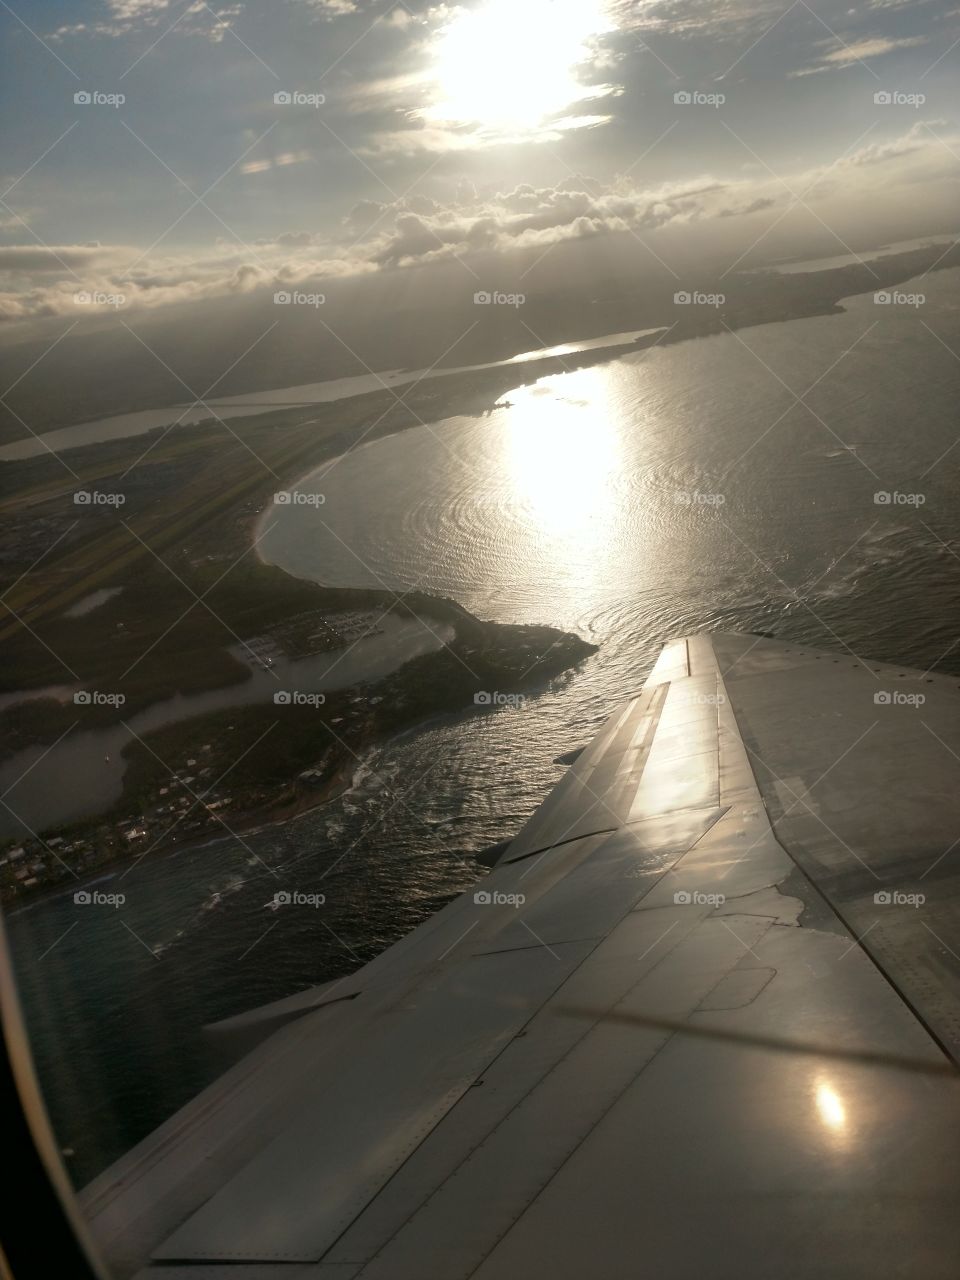 My last view of Puerto Rico before we sling shotted away.